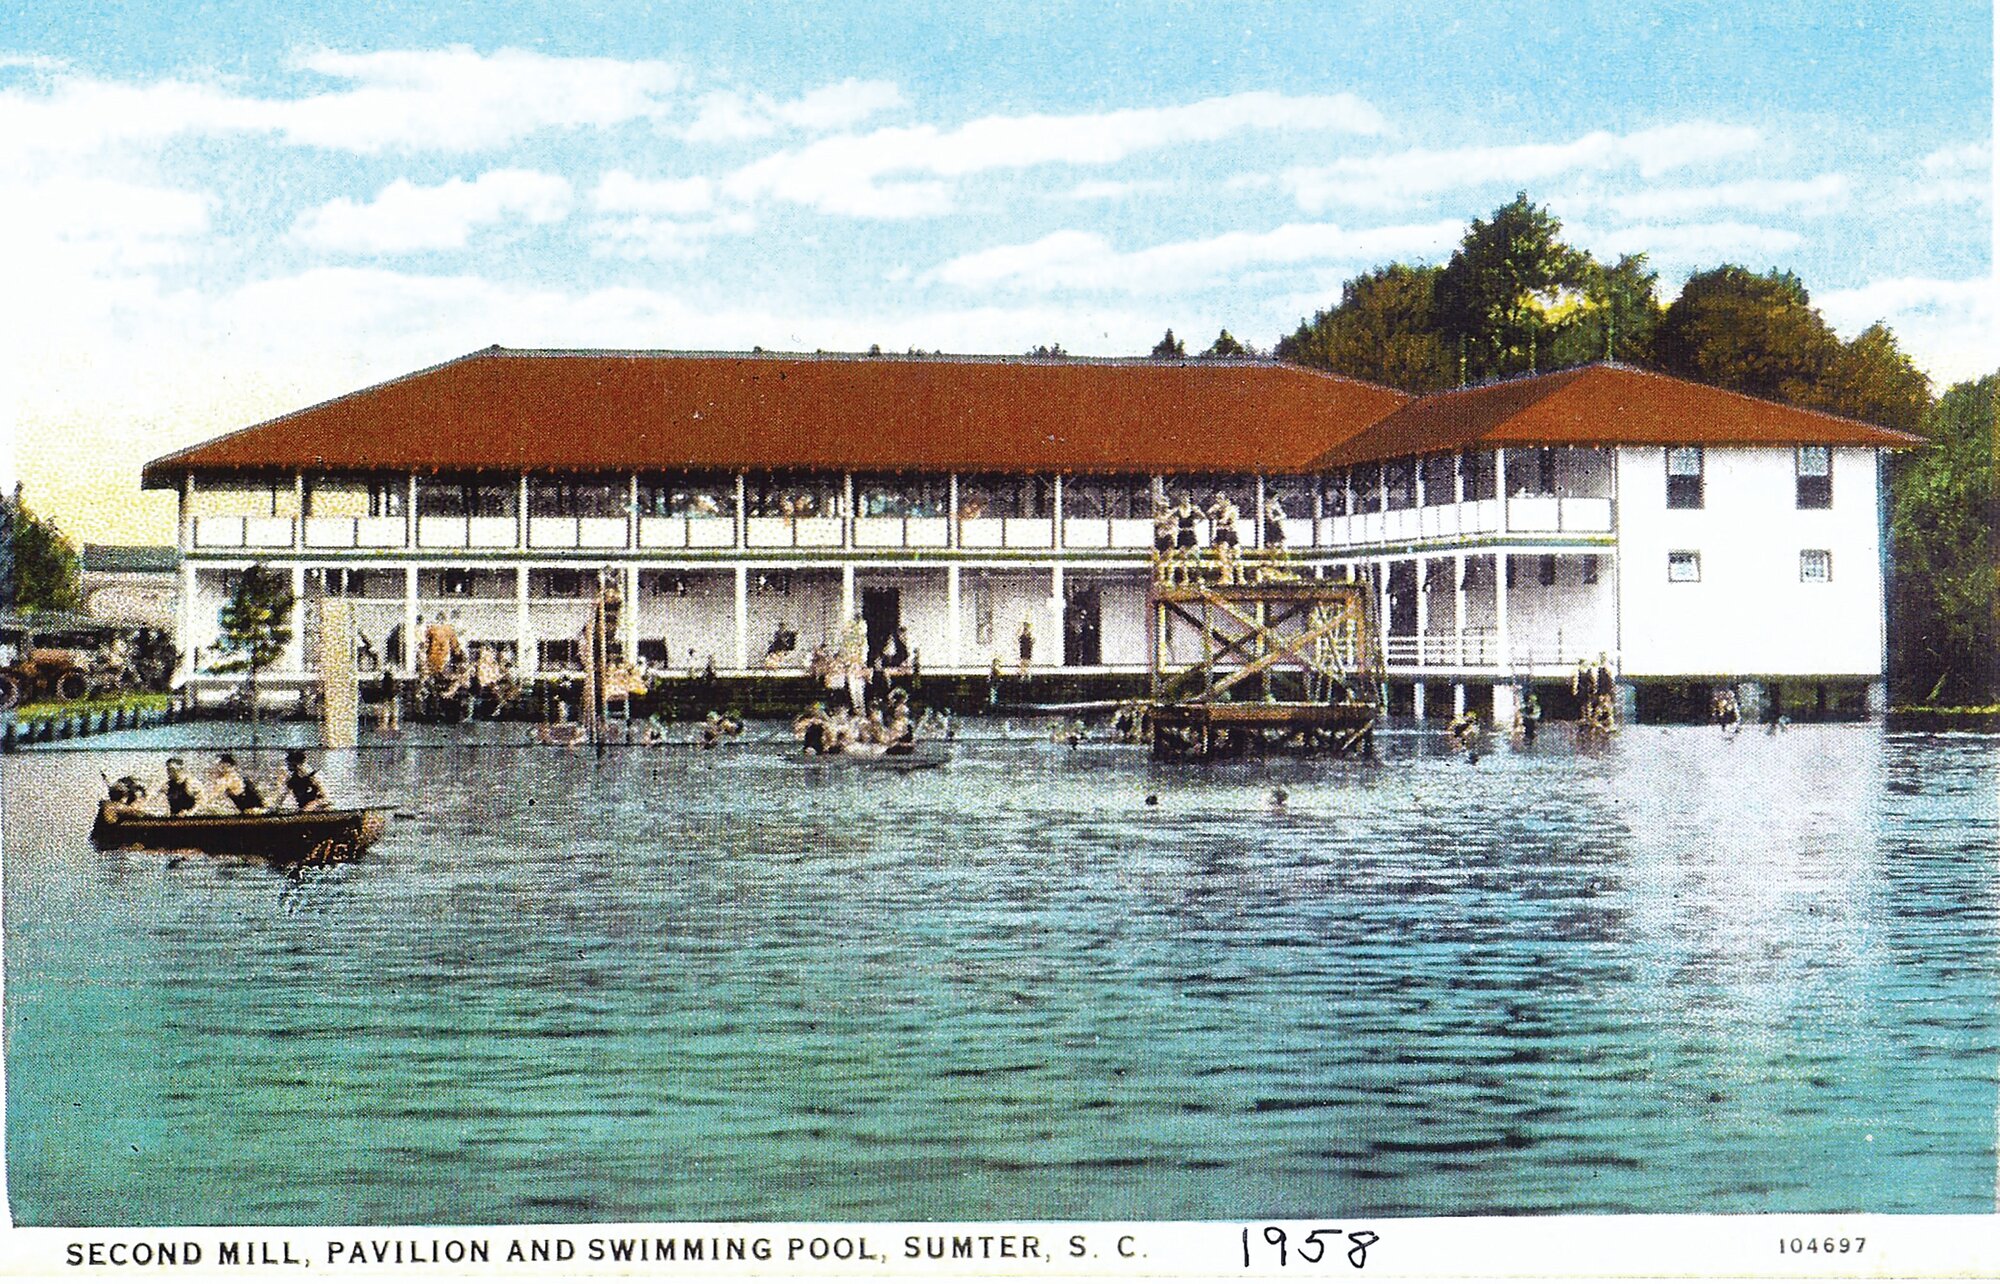 When the long, hot days of summer became too much, Sumterites would head for Pocalla Springs or "Sunset Lake" for a refreshing swim or a day of boating. The lake's pavilion was the scene of many festive summer dances and social events. Even before the pavilion was built, this area was the site of much activity. As early as the 18th century, Richard Bradford erected a grist mill. Soon after, the lake became known as Second Mill. On the site of what is now Swan Lake Iris Gardens.